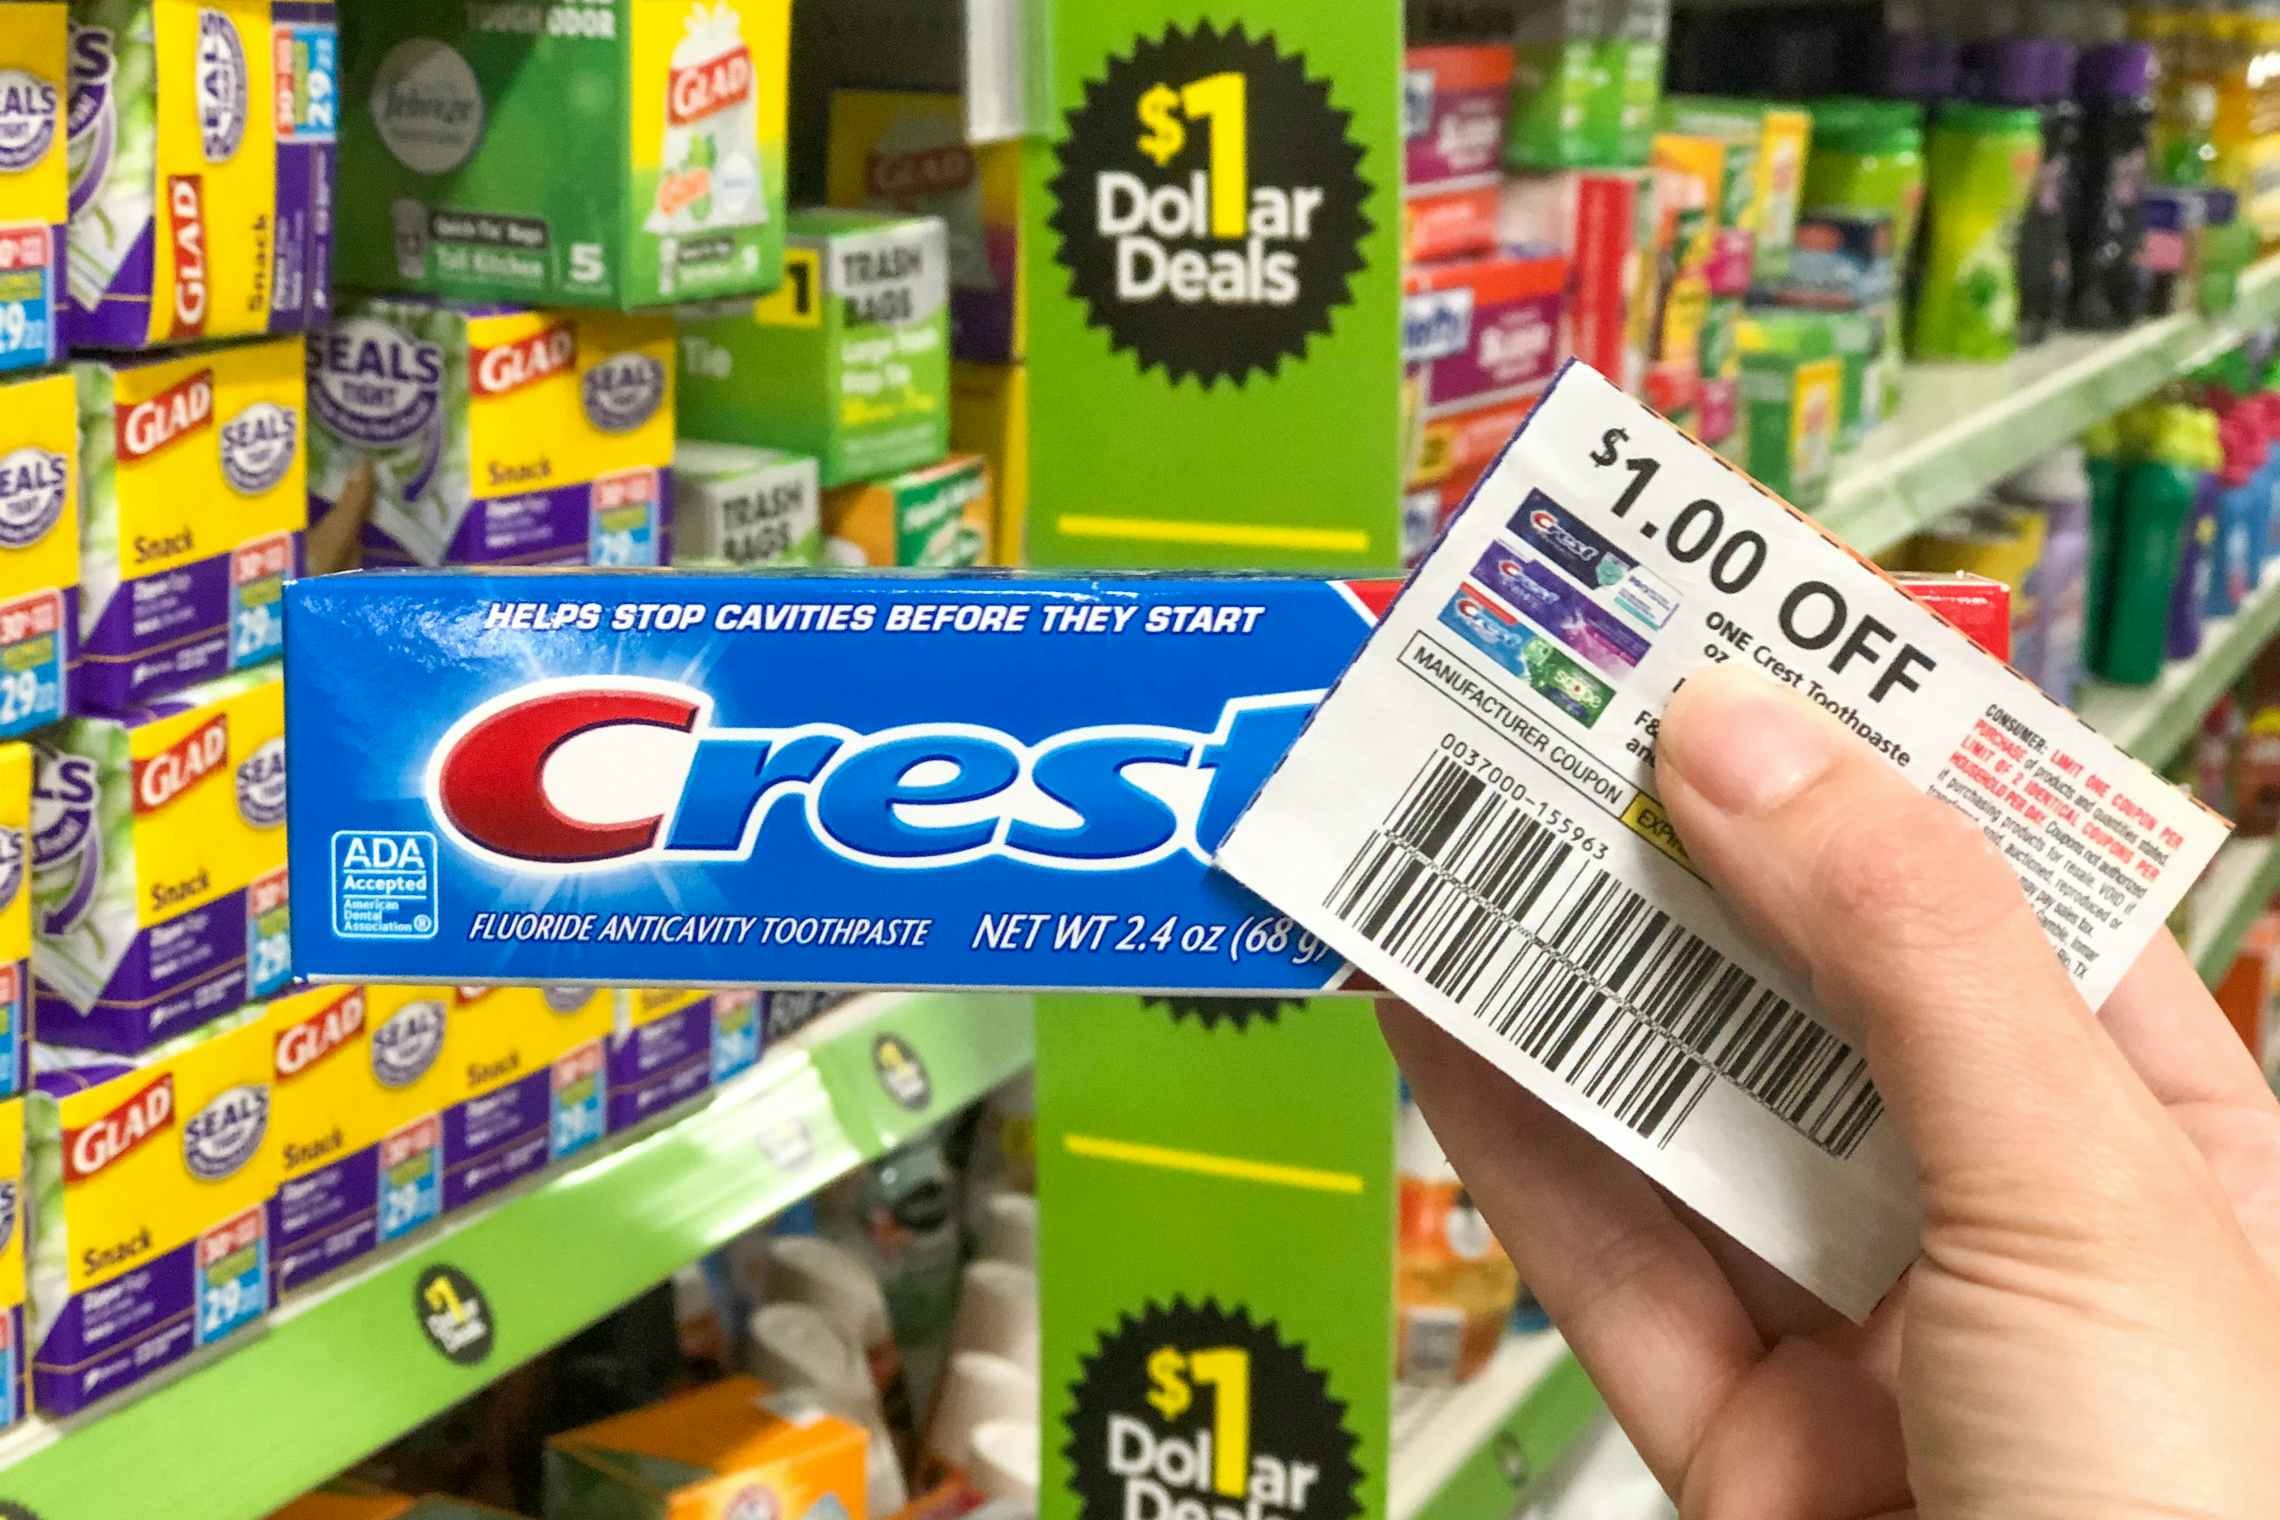 $1 off coupons next to a box of Crest toothpaste